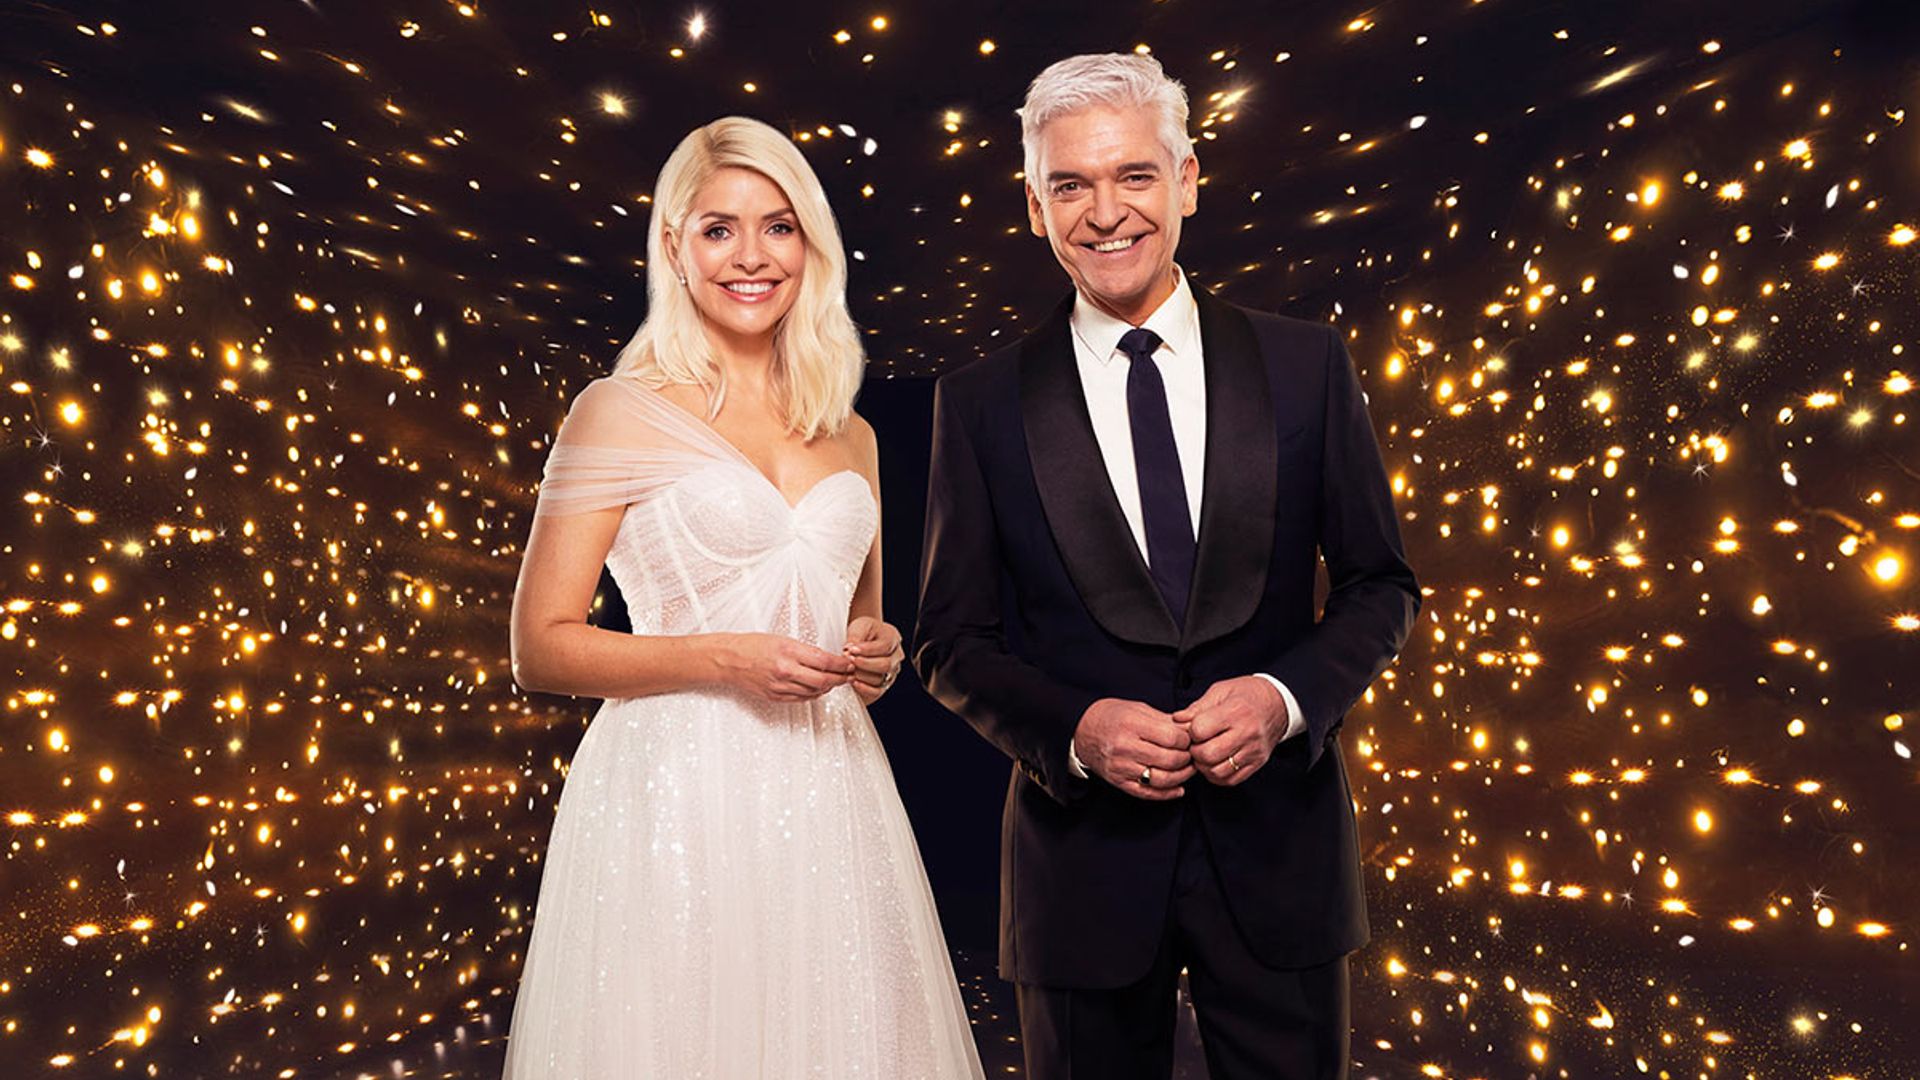 dancing on ice special episode